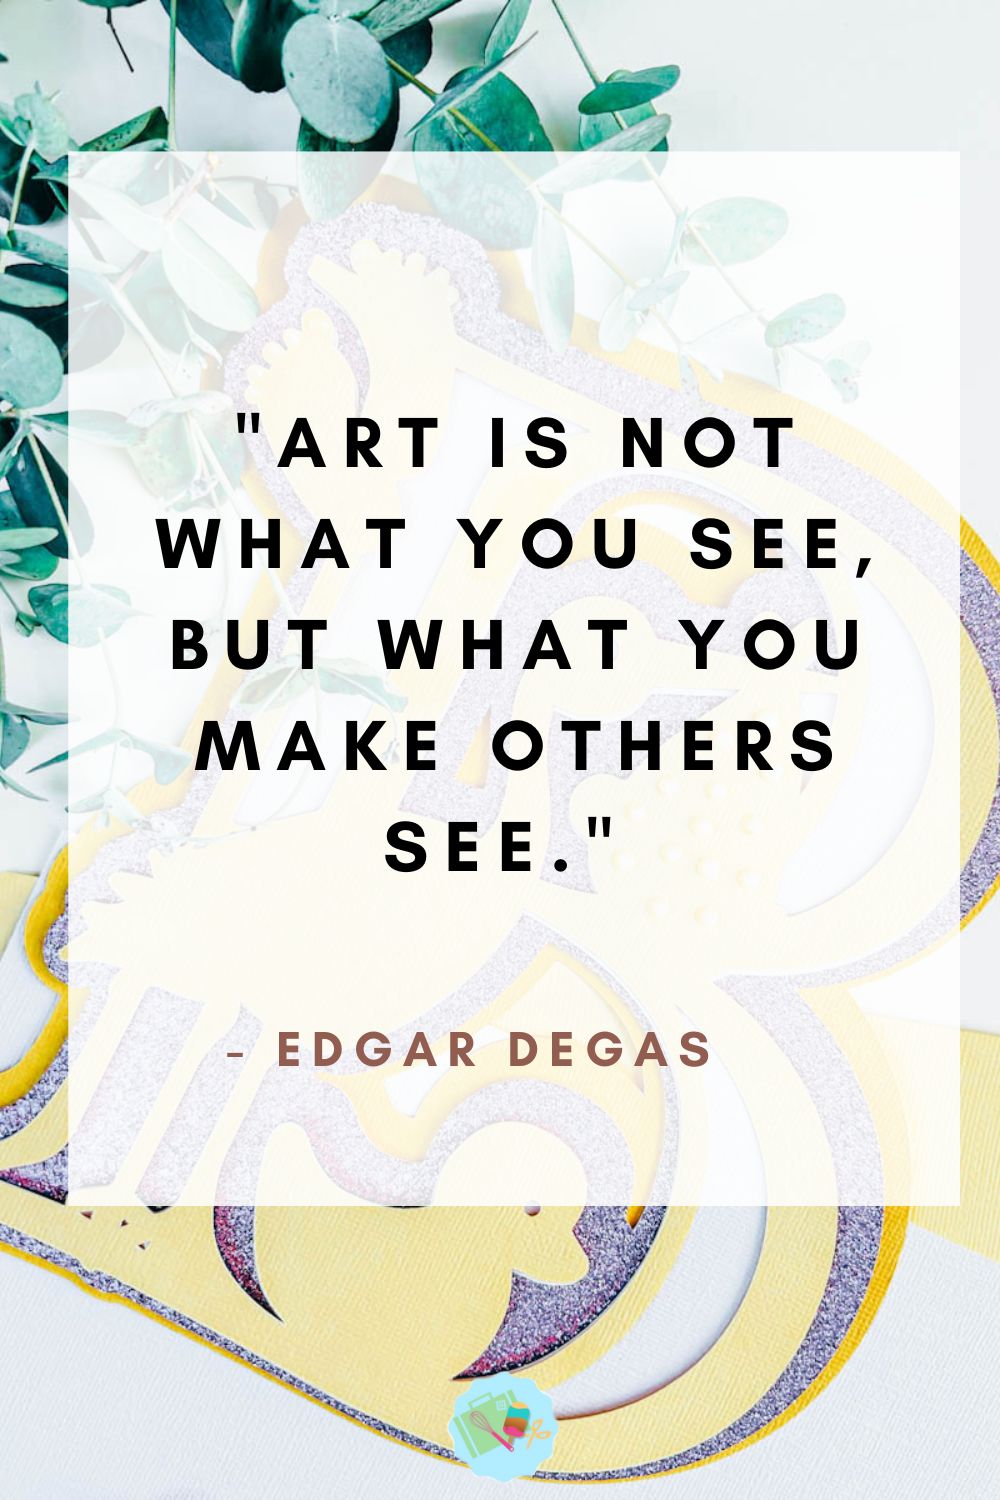 Art is not what you see, but what you make others see. Edgar Degas